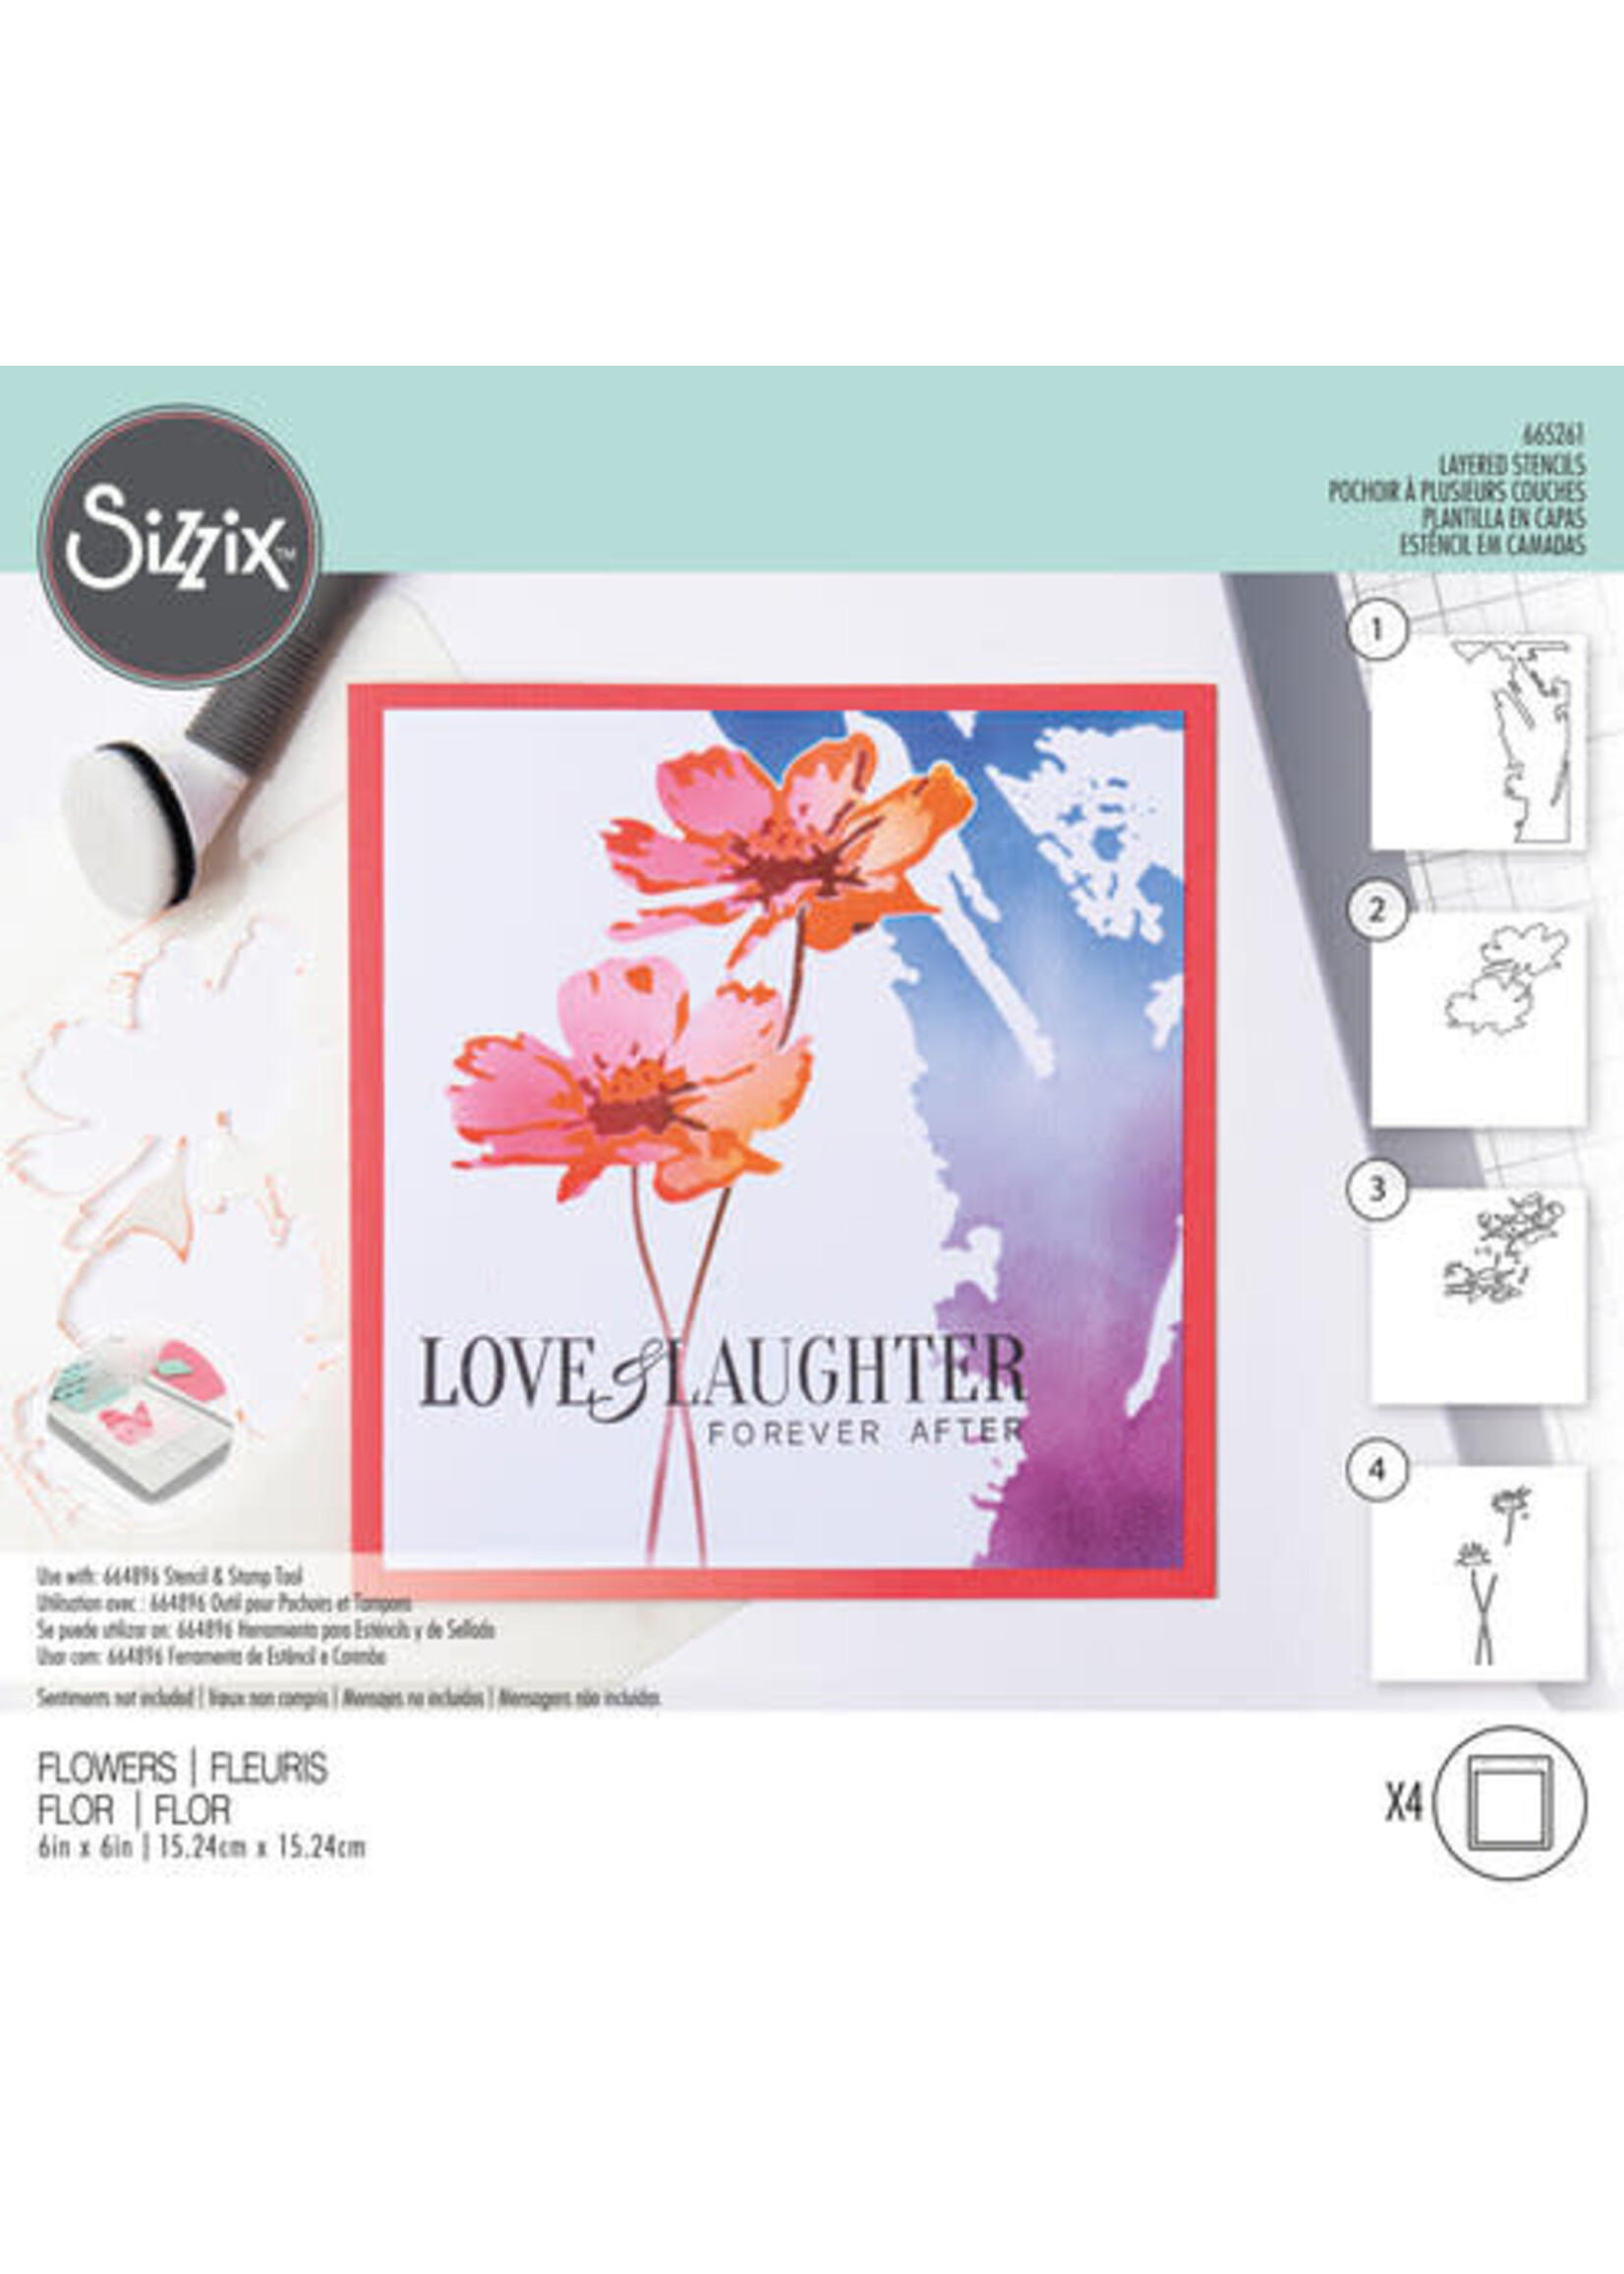 Sizzix Layered Stencils by Olivia Rose Flowers (4pcs) (665261)